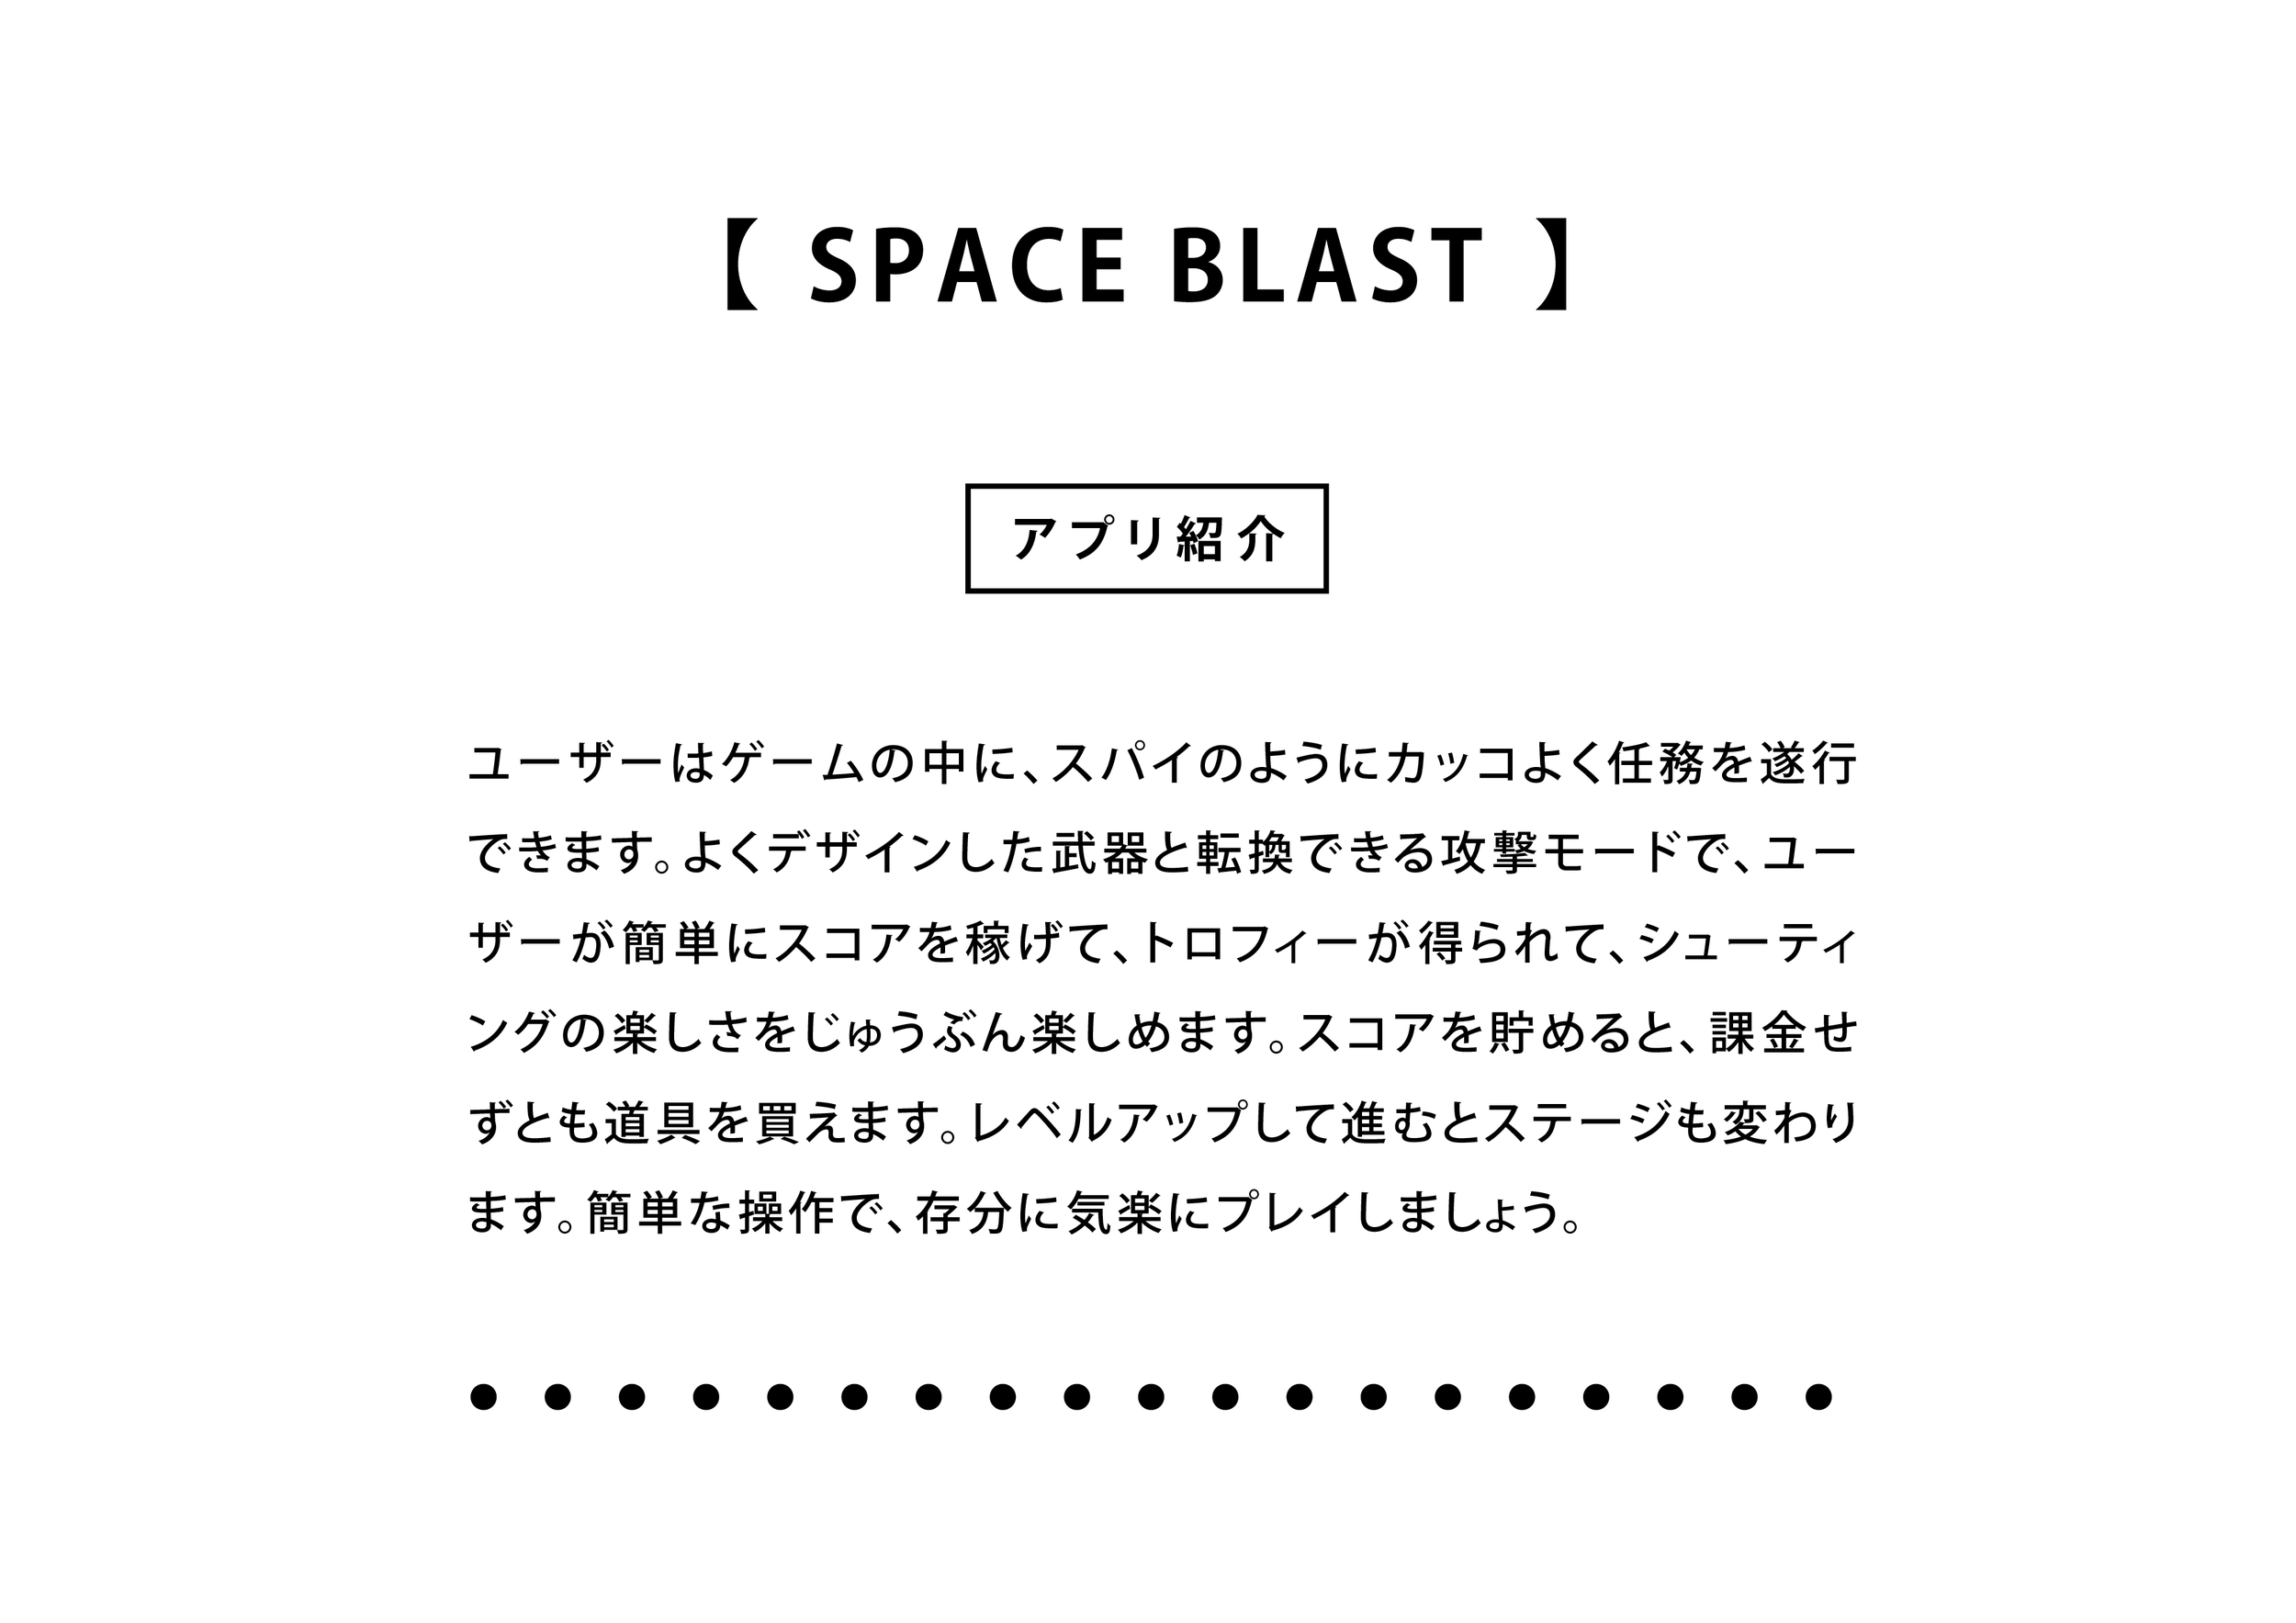 Promotion Kits_Space Blast-07.png